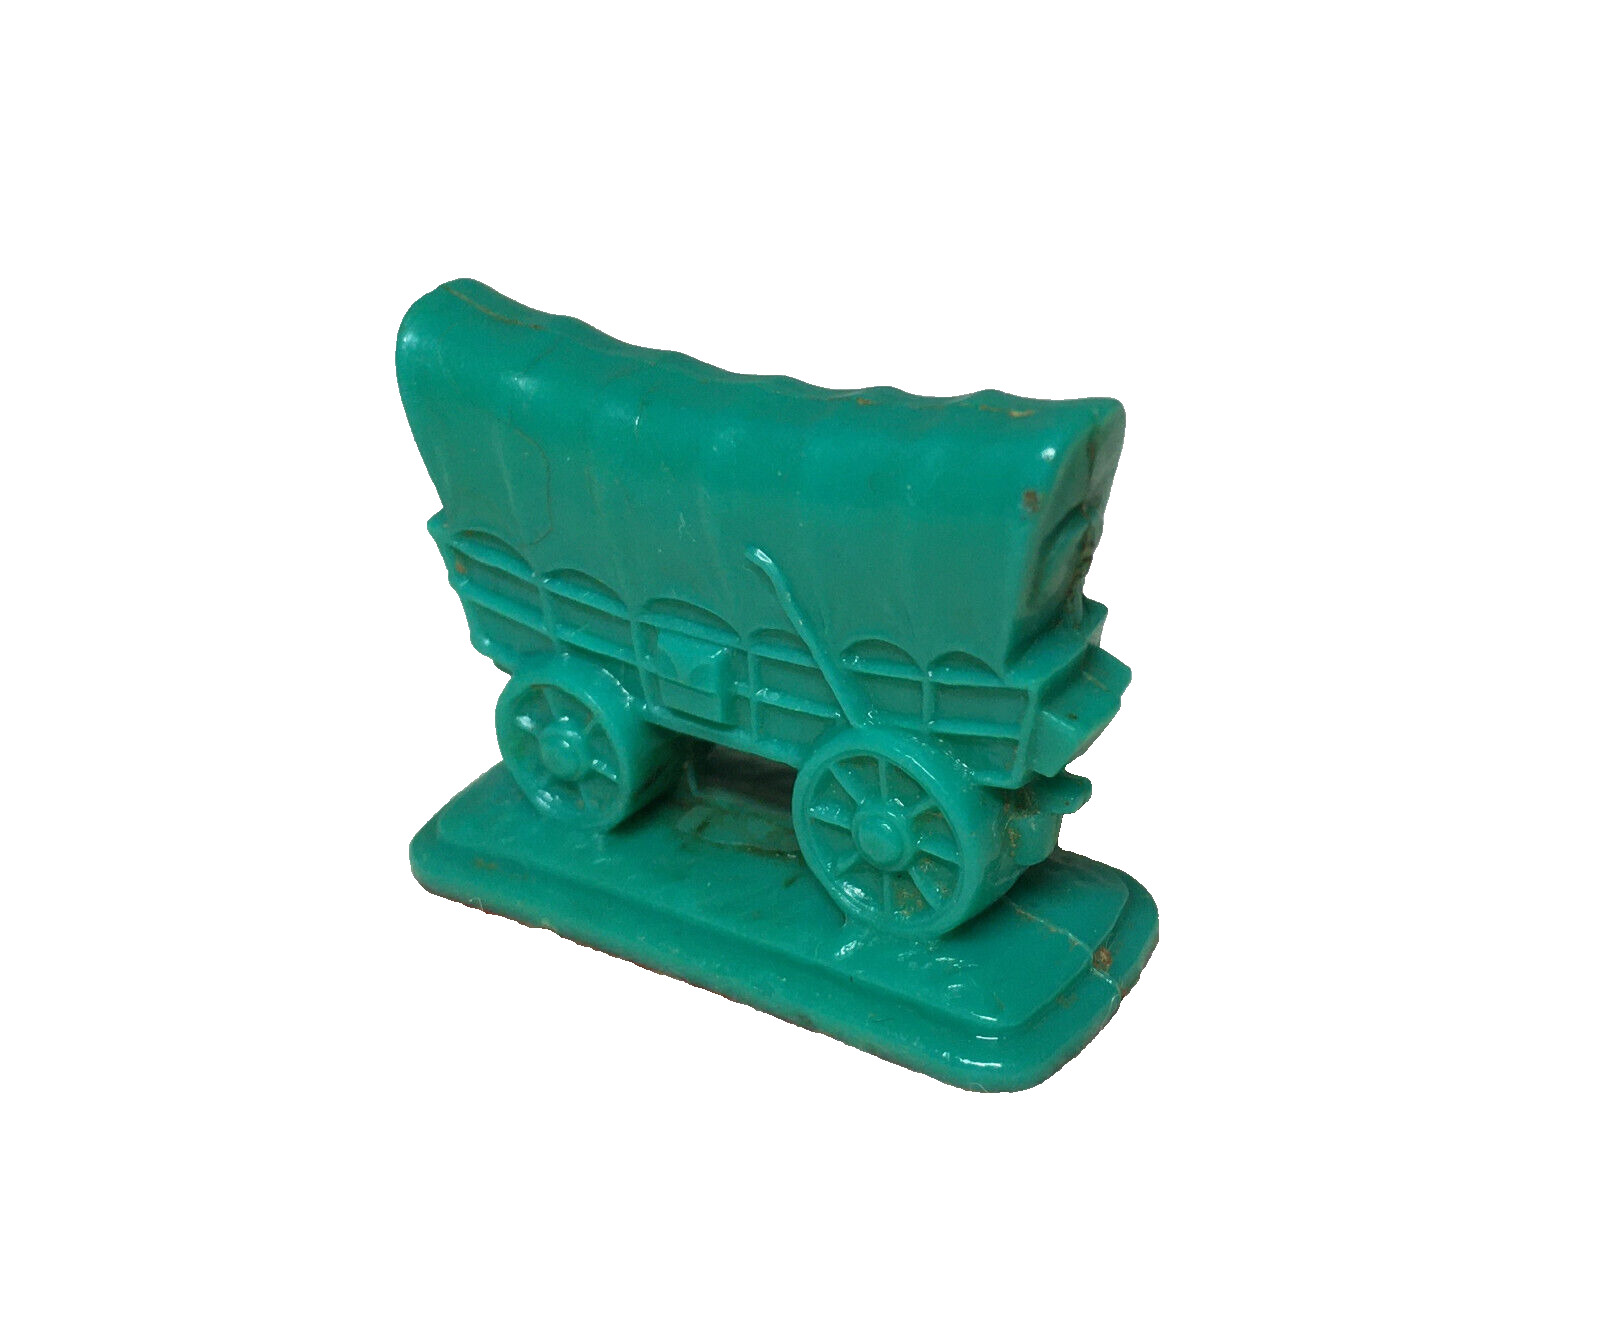 Rare 1950s Vintage Cracker Jack Prize Toy Green Covered Wagon Stand Up